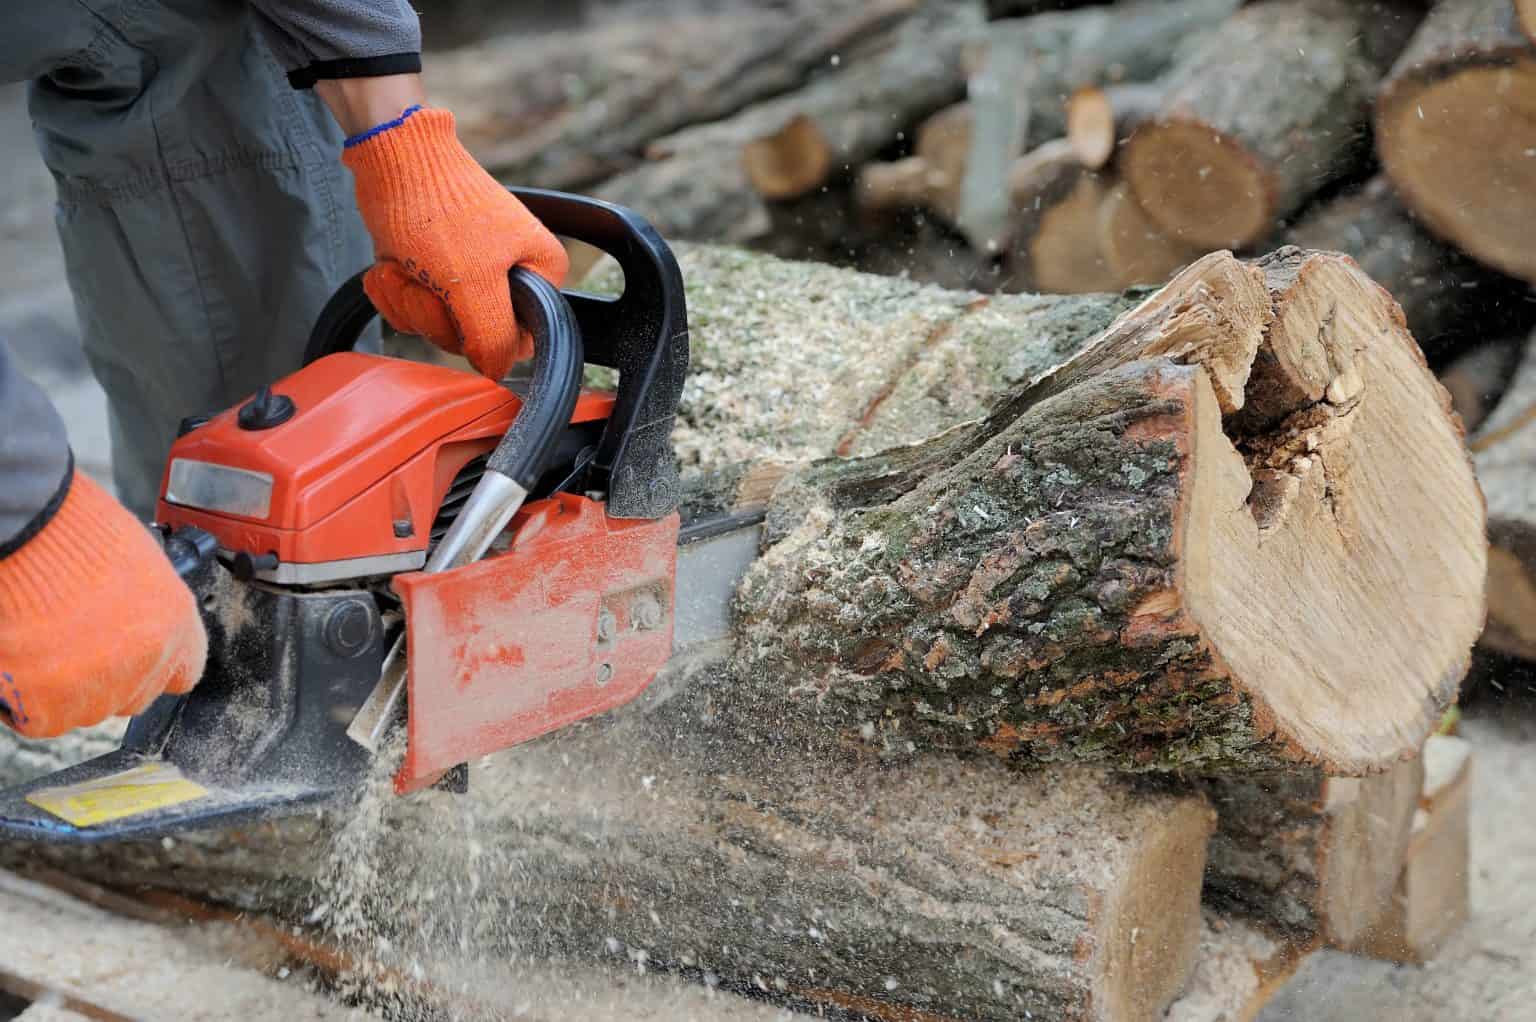 Why Does My Chainsaw Keep Stretching? Home And Garden Expert